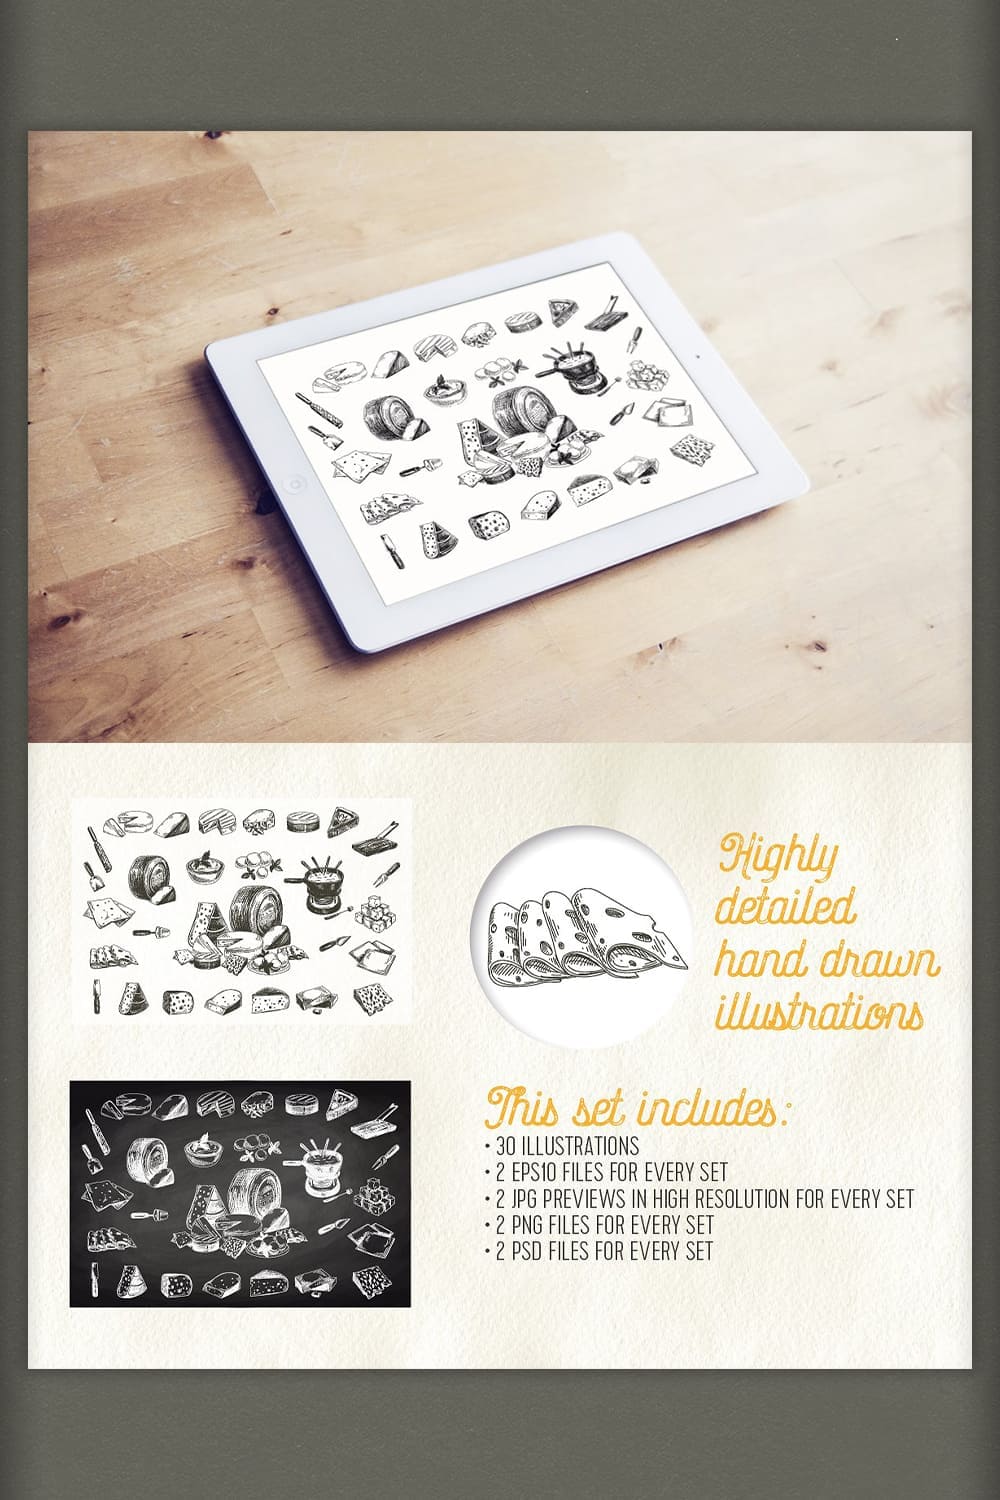 Highly Detailed Hand Drawn Illustrations, Cheese In Tablet, List and Chalkboard Version.